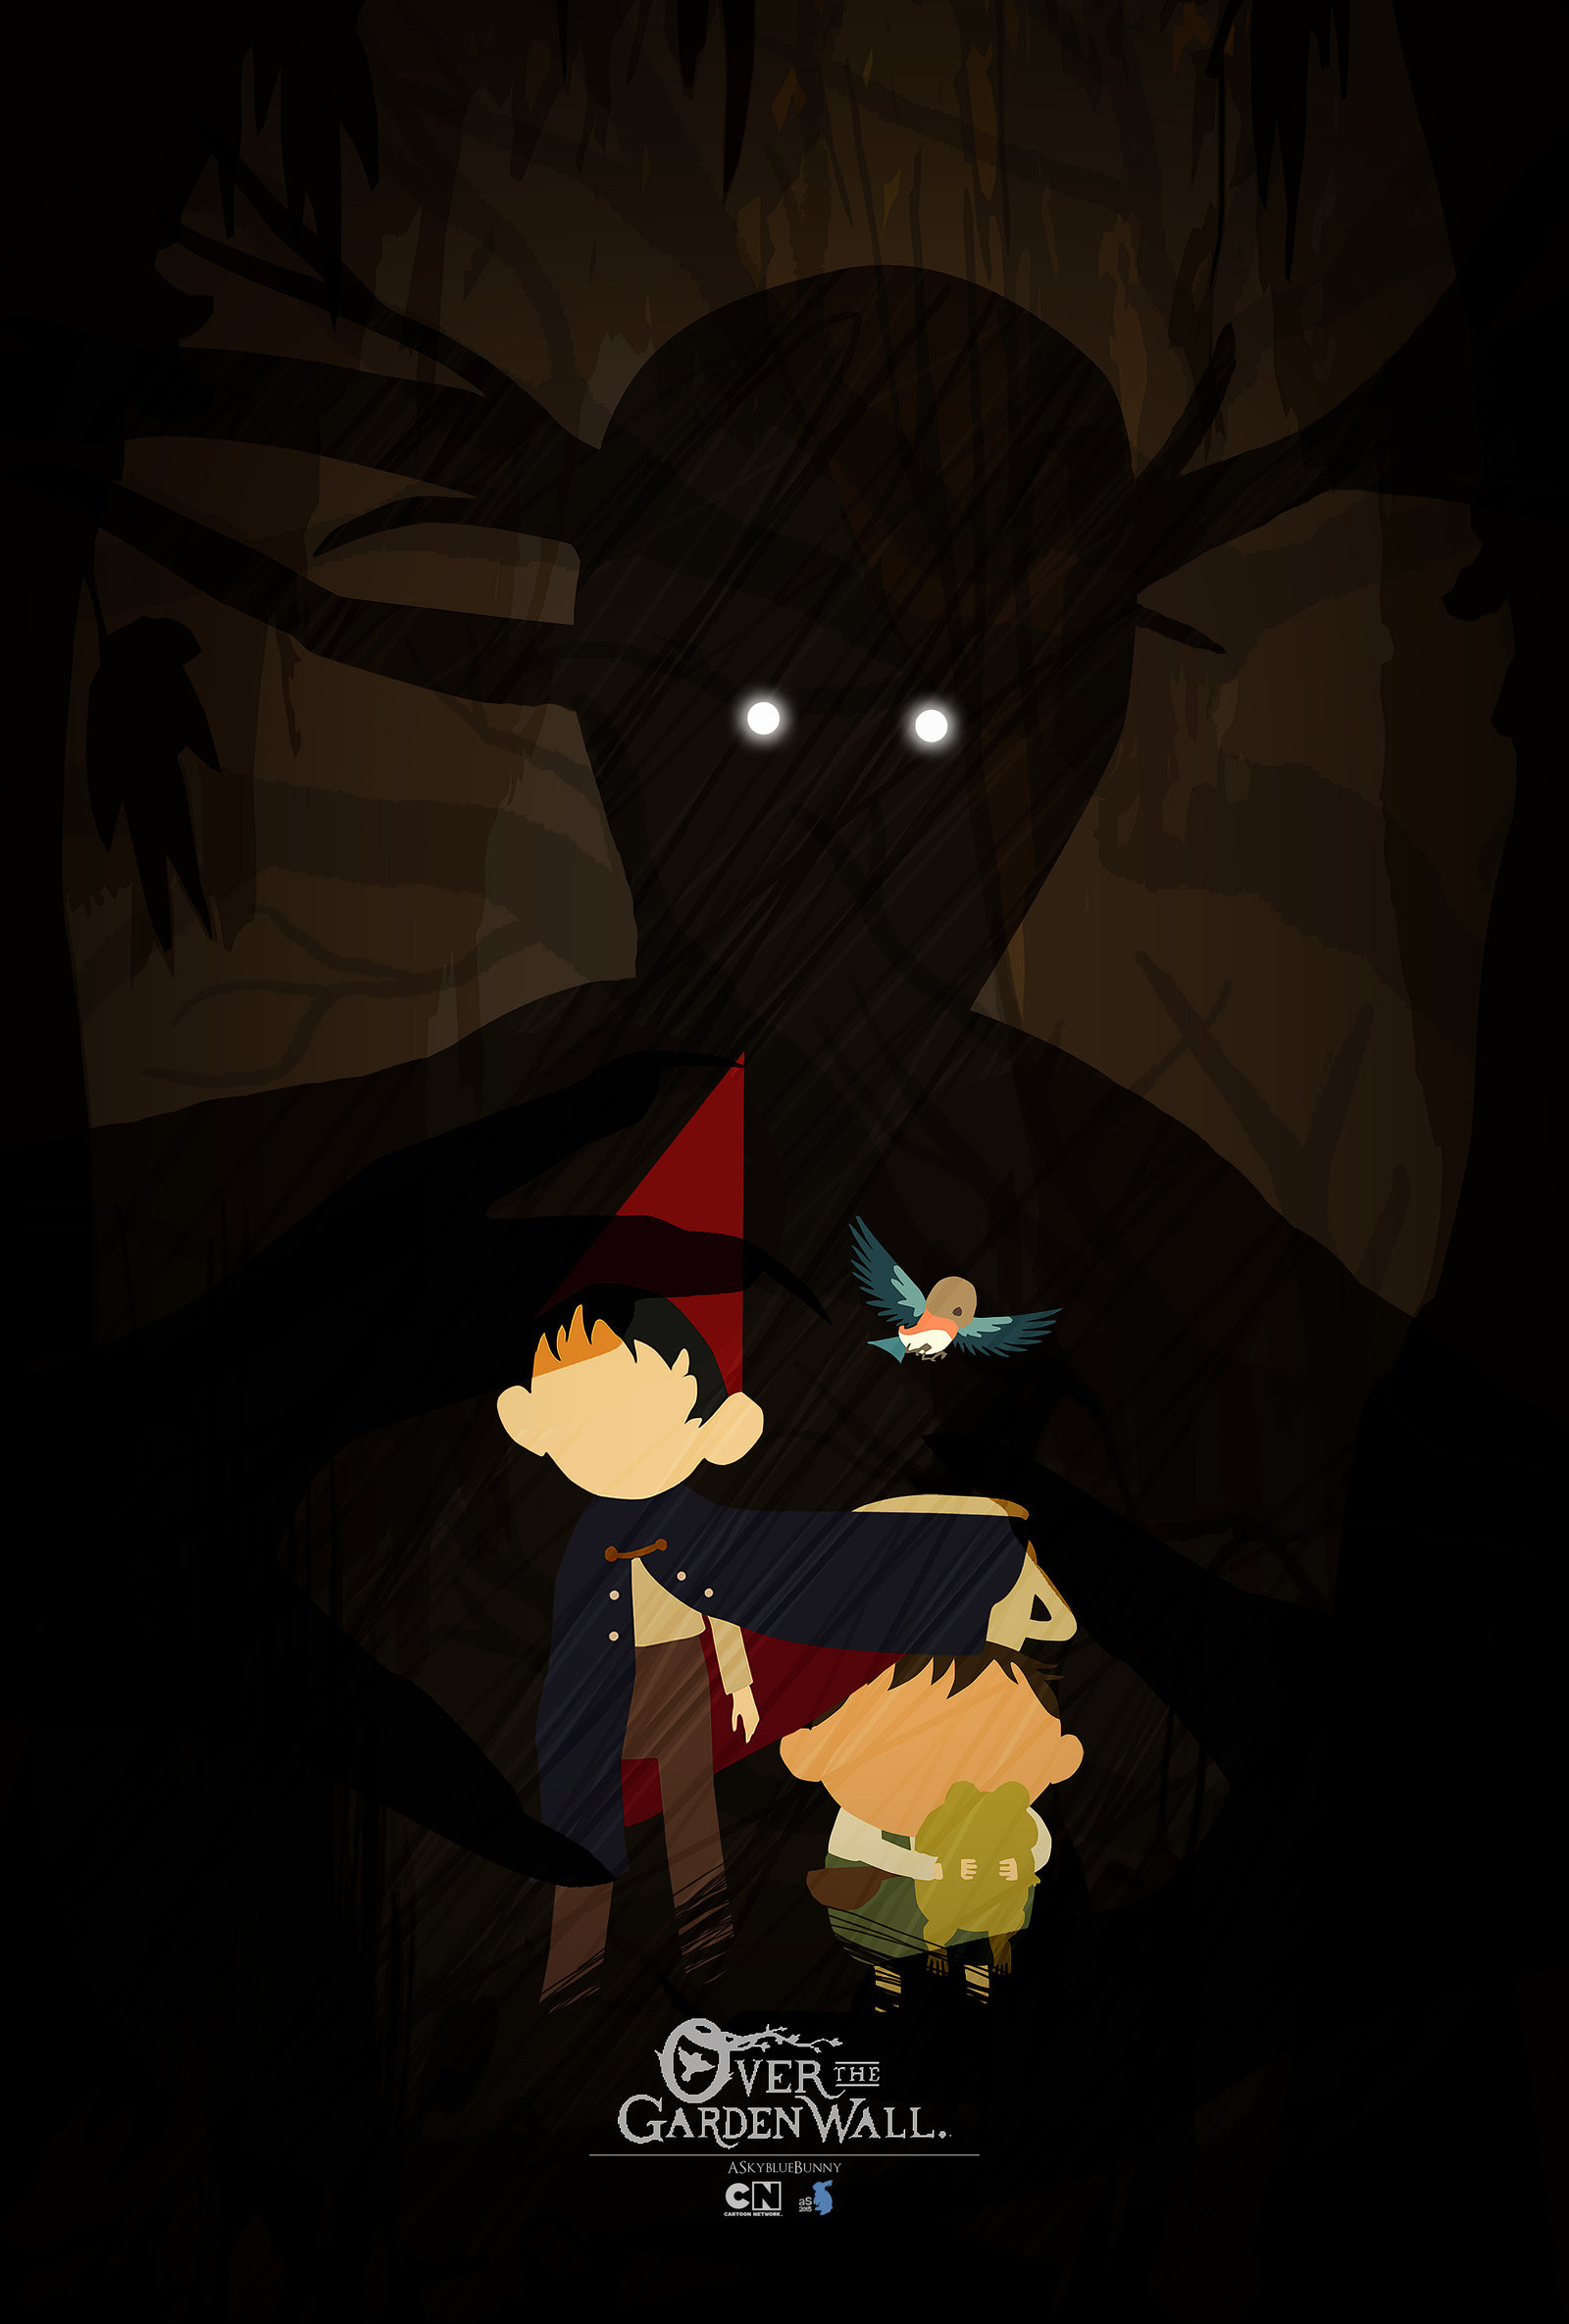 Over the Garden Wall by ASkyblueBunny Over the Garden Wall by ASkyblueBunny